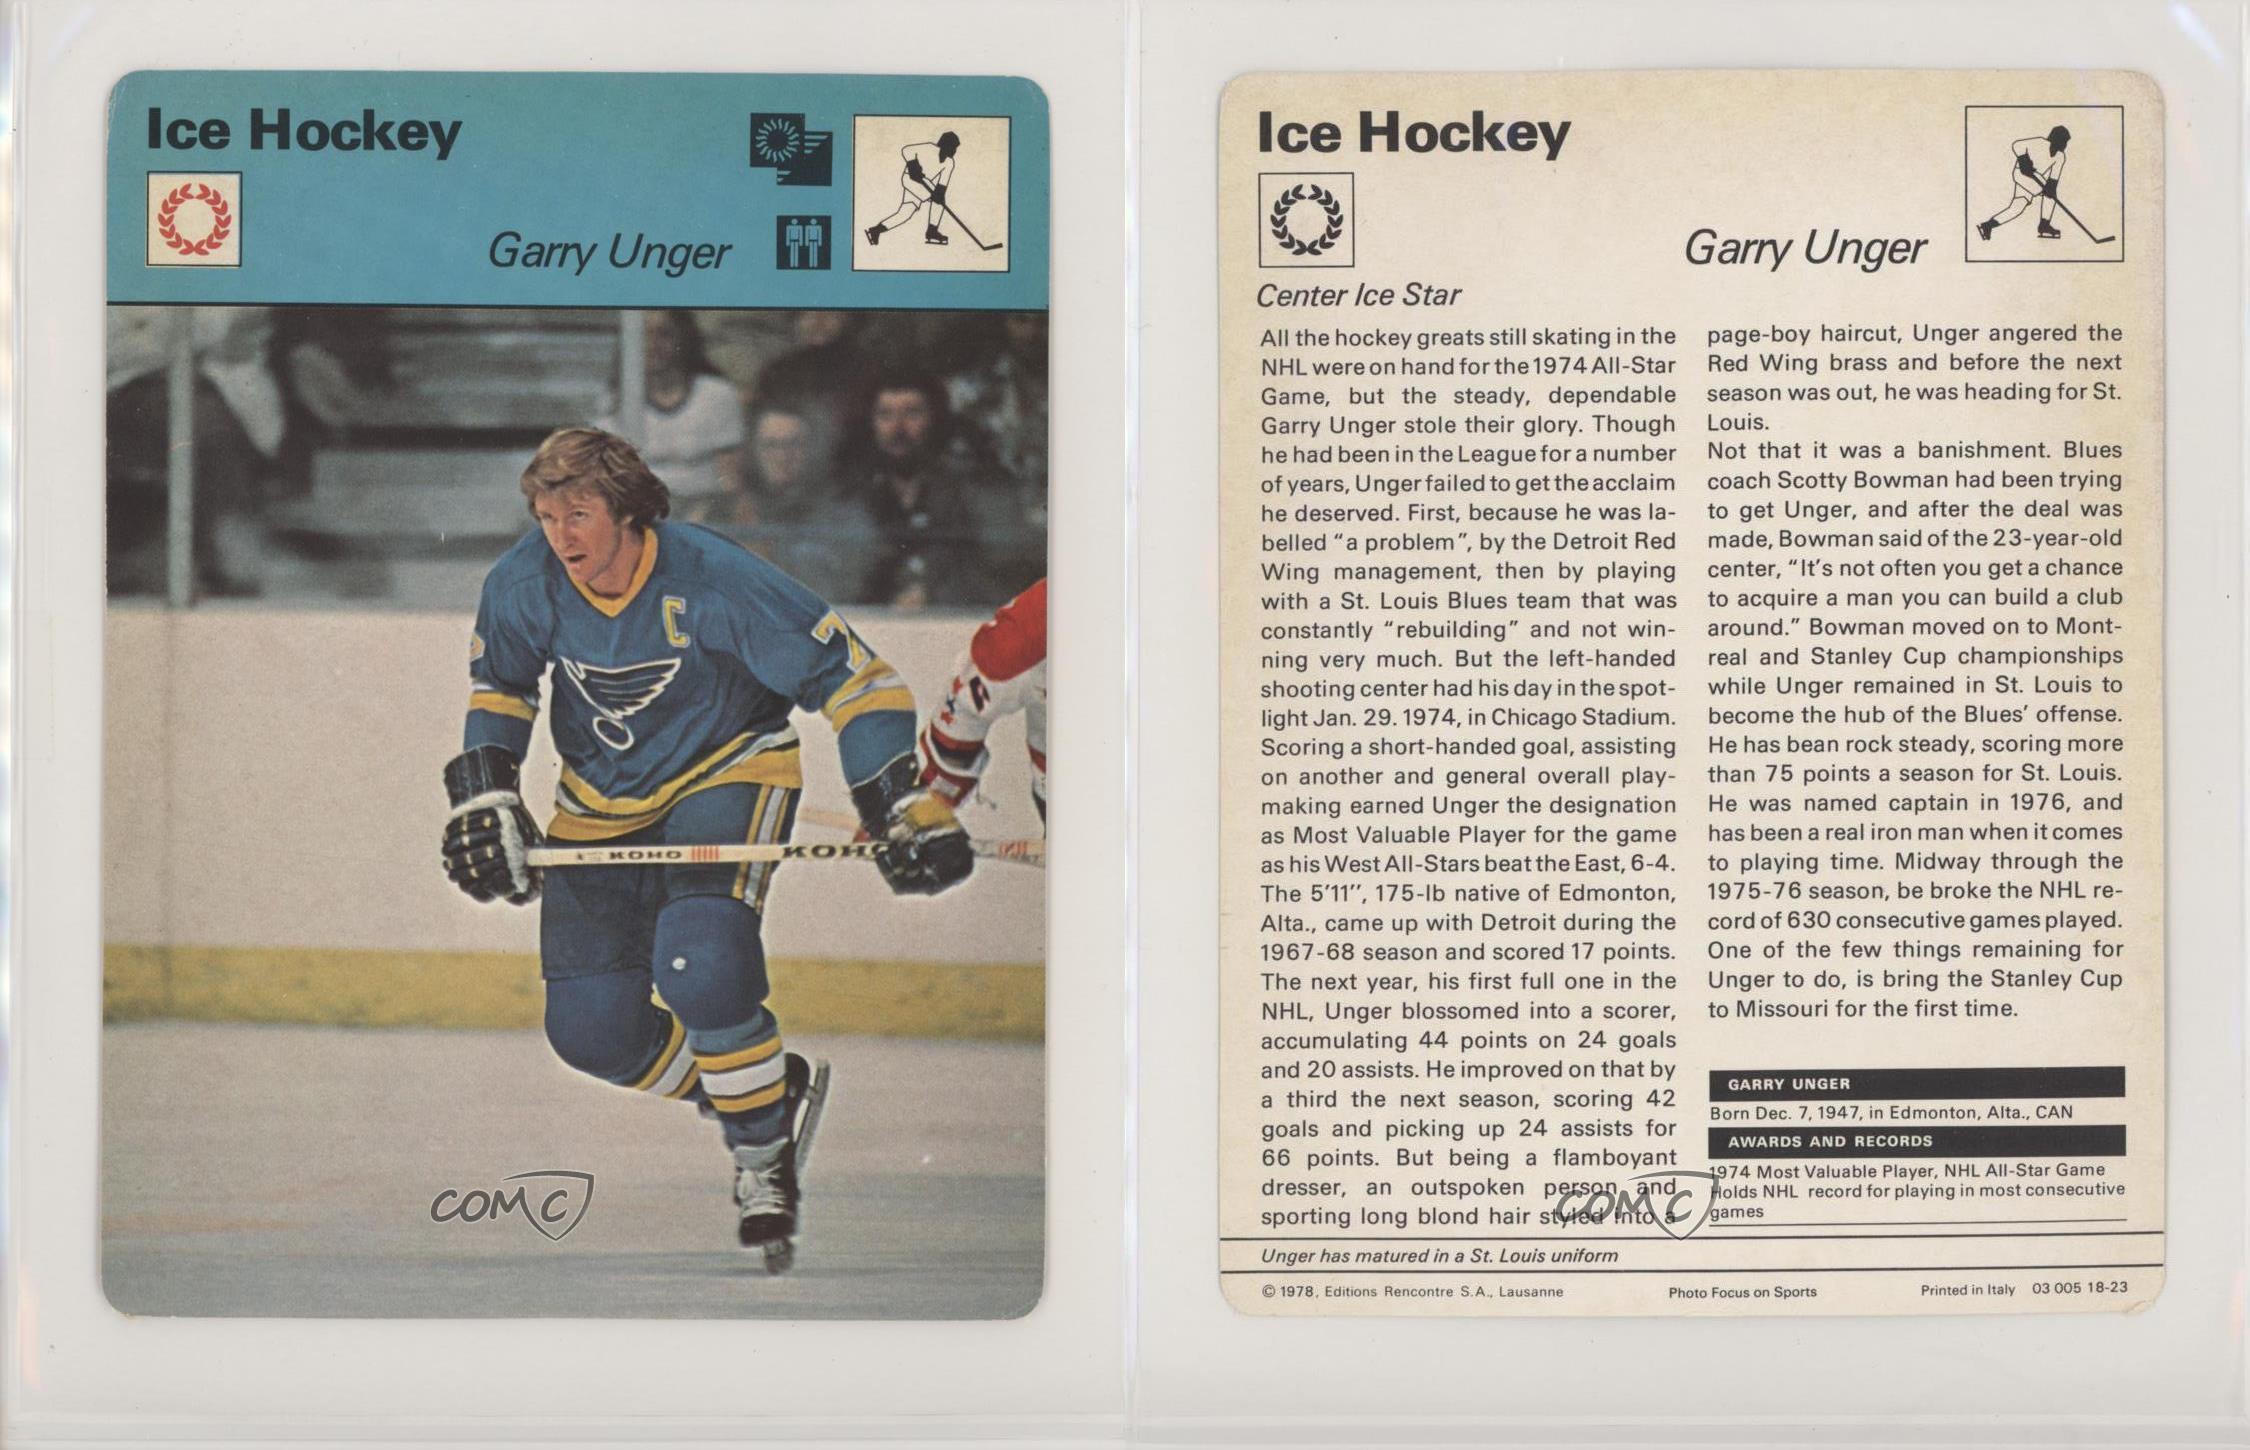 GARRY UNGER 1978 Editions Rencontre Sportscasters Card St 